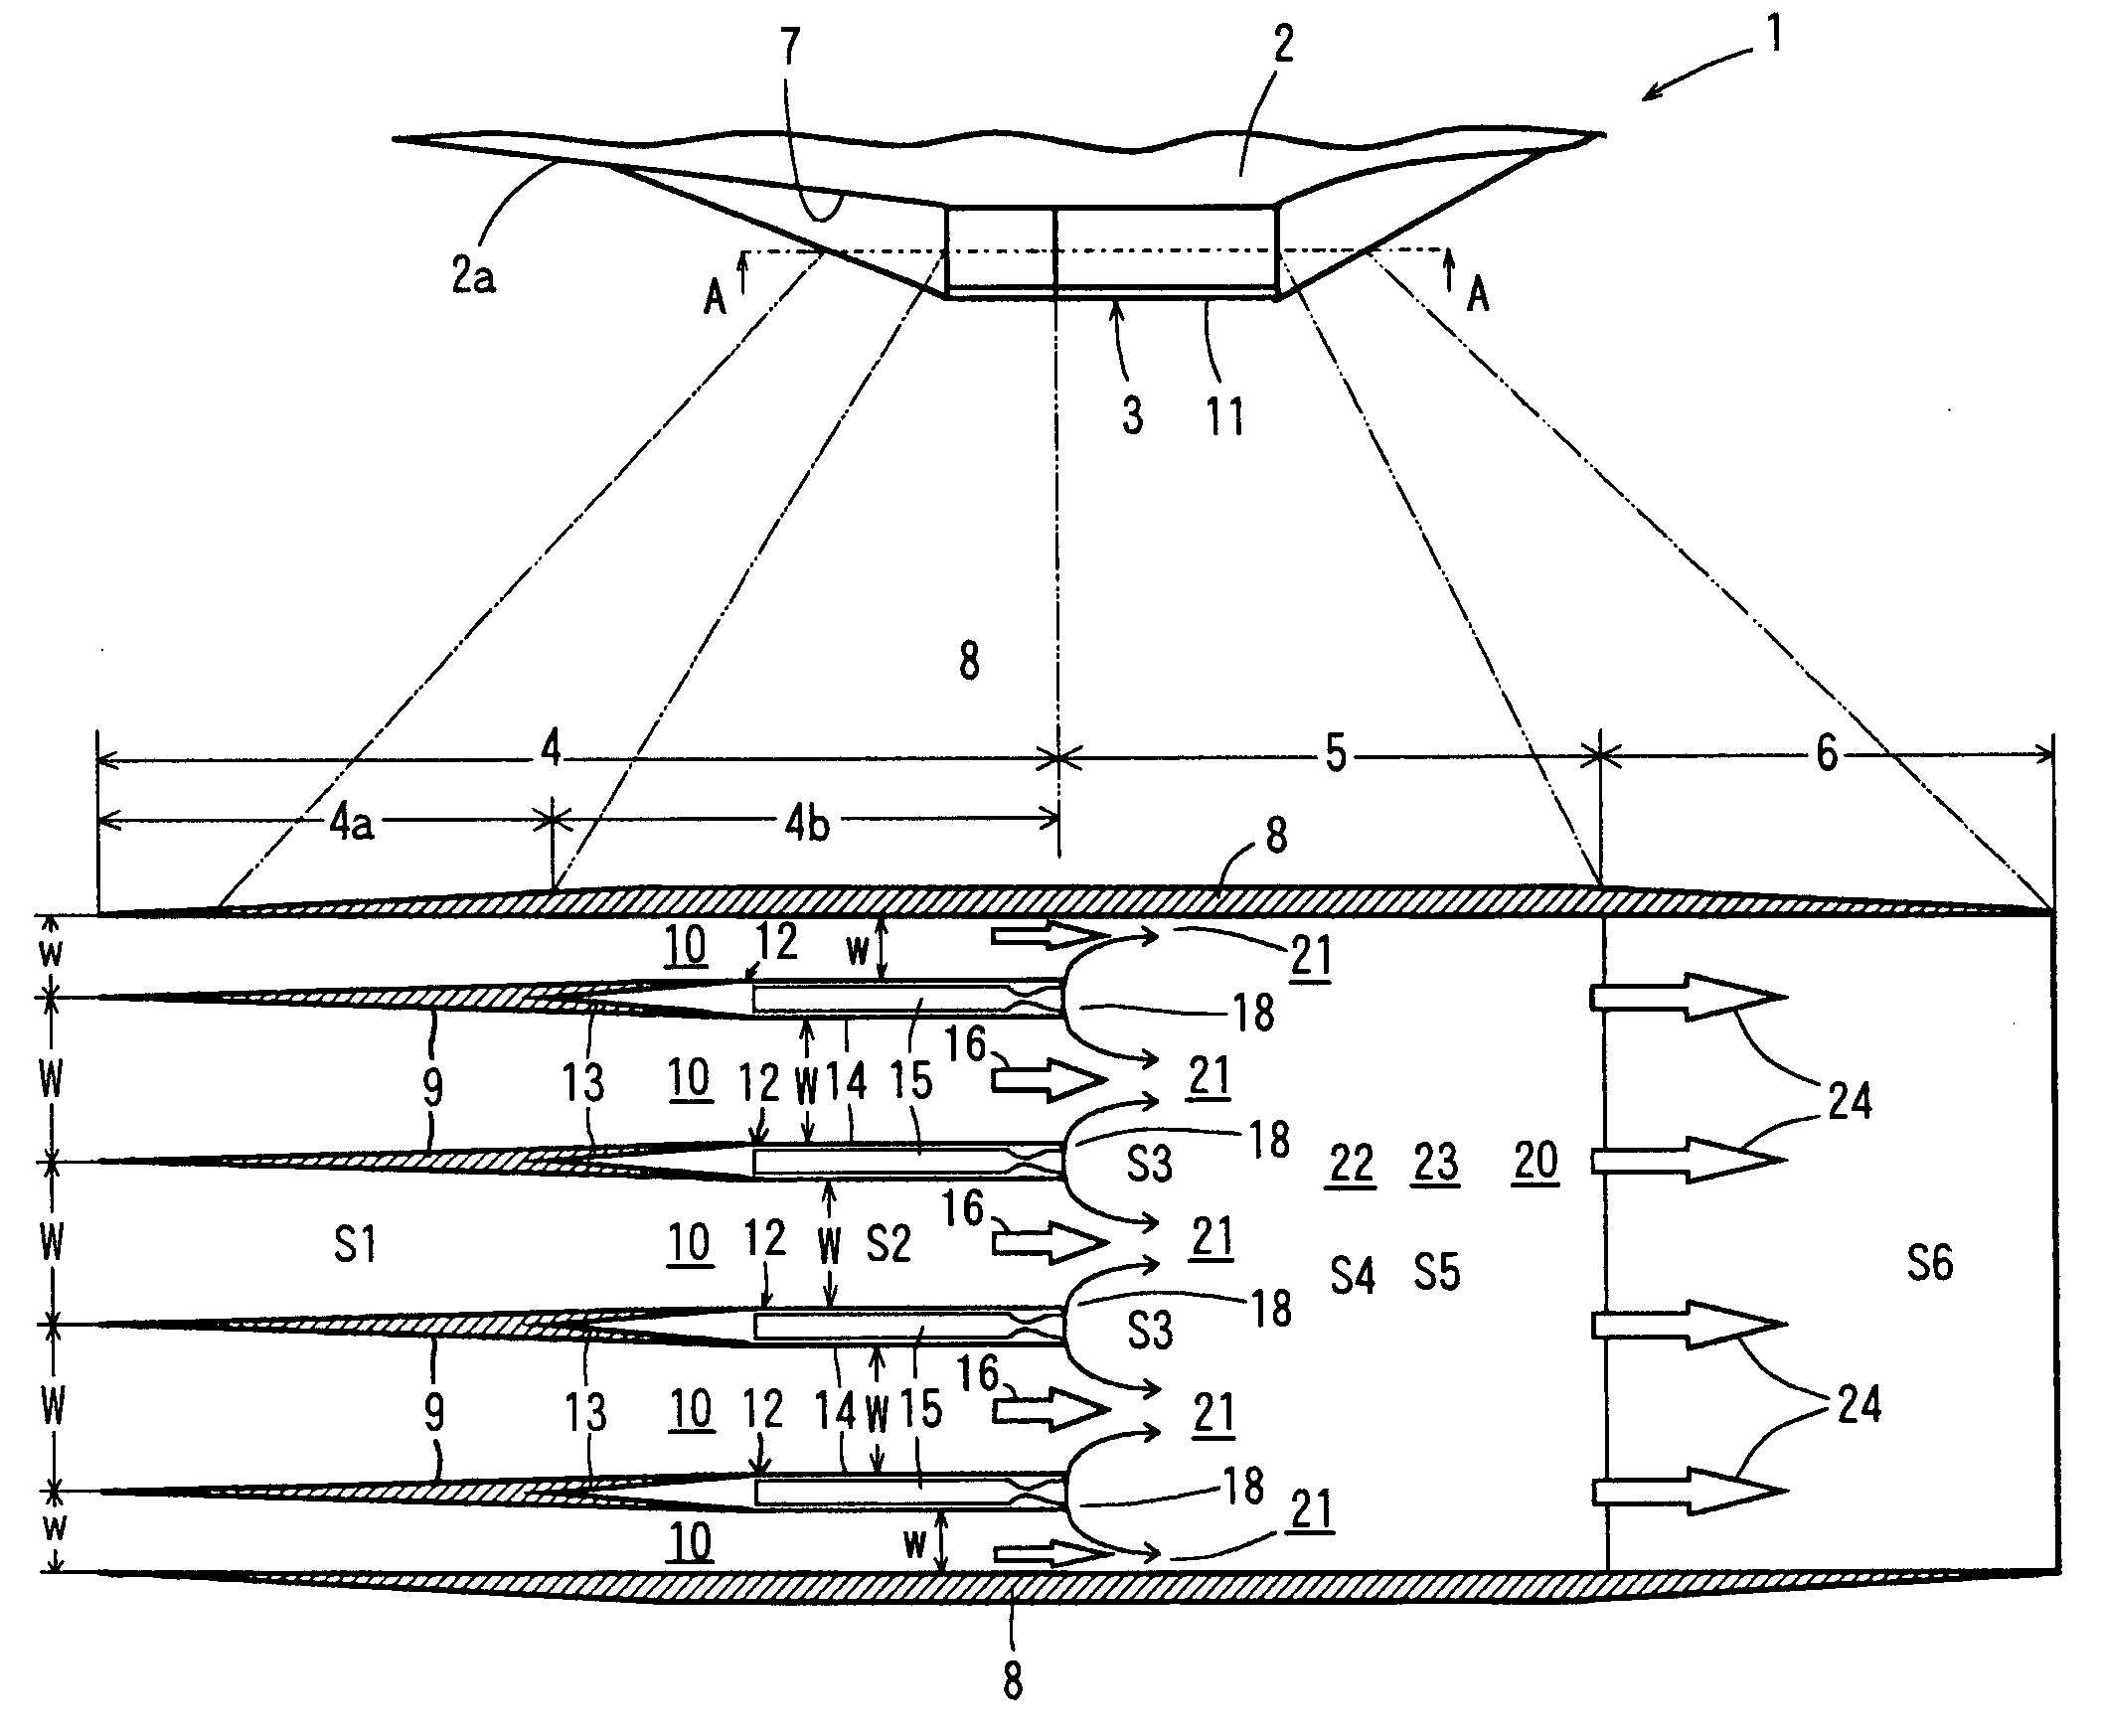 Combined engine for single-stage spacecraft